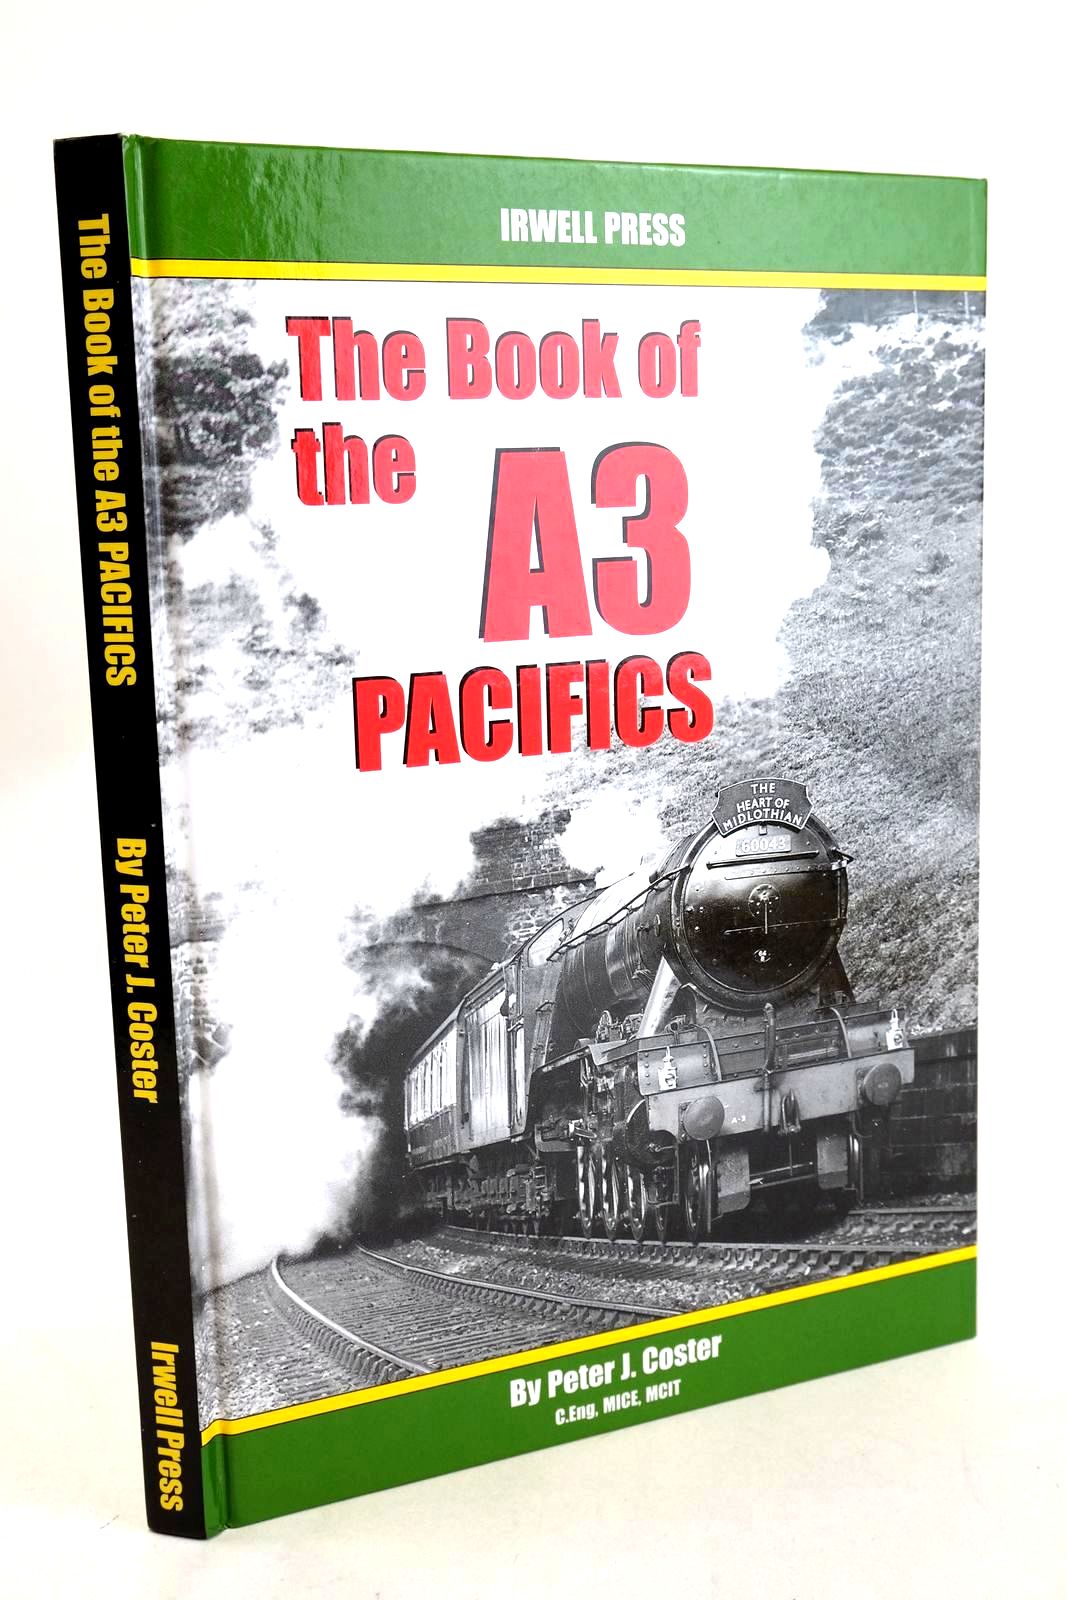 Photo of THE BOOK OF THE A3 PACIFICS written by Coster, Peter J. published by Irwell Press (STOCK CODE: 1327312)  for sale by Stella & Rose's Books